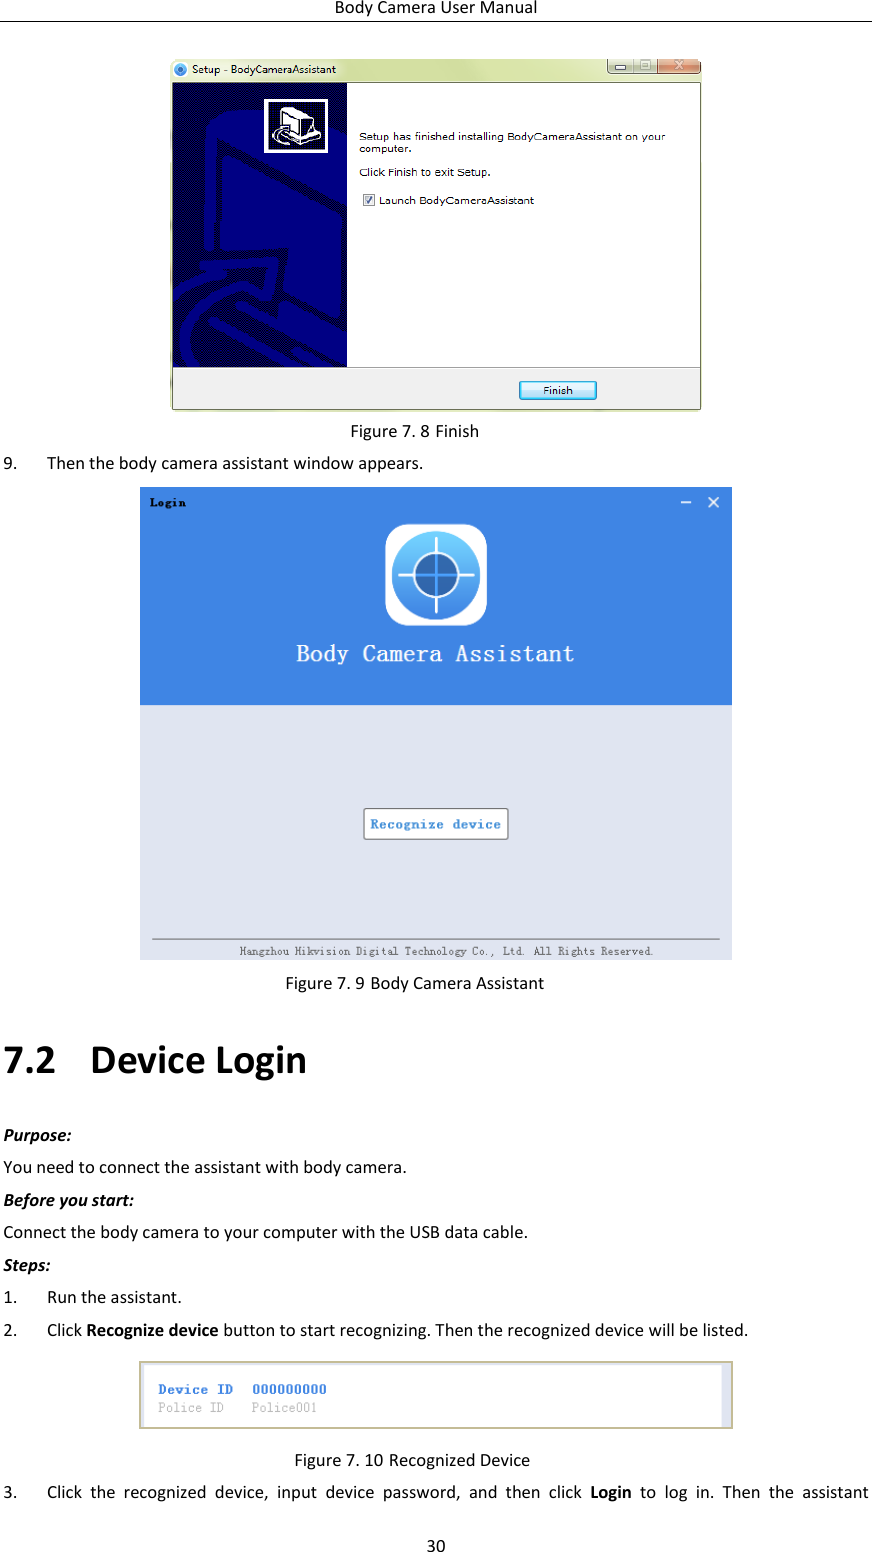 Body Camera User Manual 30  Figure 7. 8 Finish 9. Then the body camera assistant window appears.  Figure 7. 9 Body Camera Assistant 7.2 Device Login Purpose: You need to connect the assistant with body camera. Before you start: Connect the body camera to your computer with the USB data cable. Steps: 1. Run the assistant. 2. Click Recognize device button to start recognizing. Then the recognized device will be listed.  Figure 7. 10 Recognized Device 3. Click  the  recognized  device,  input  device  password,  and  then  click  Login  to  log  in.  Then  the  assistant 